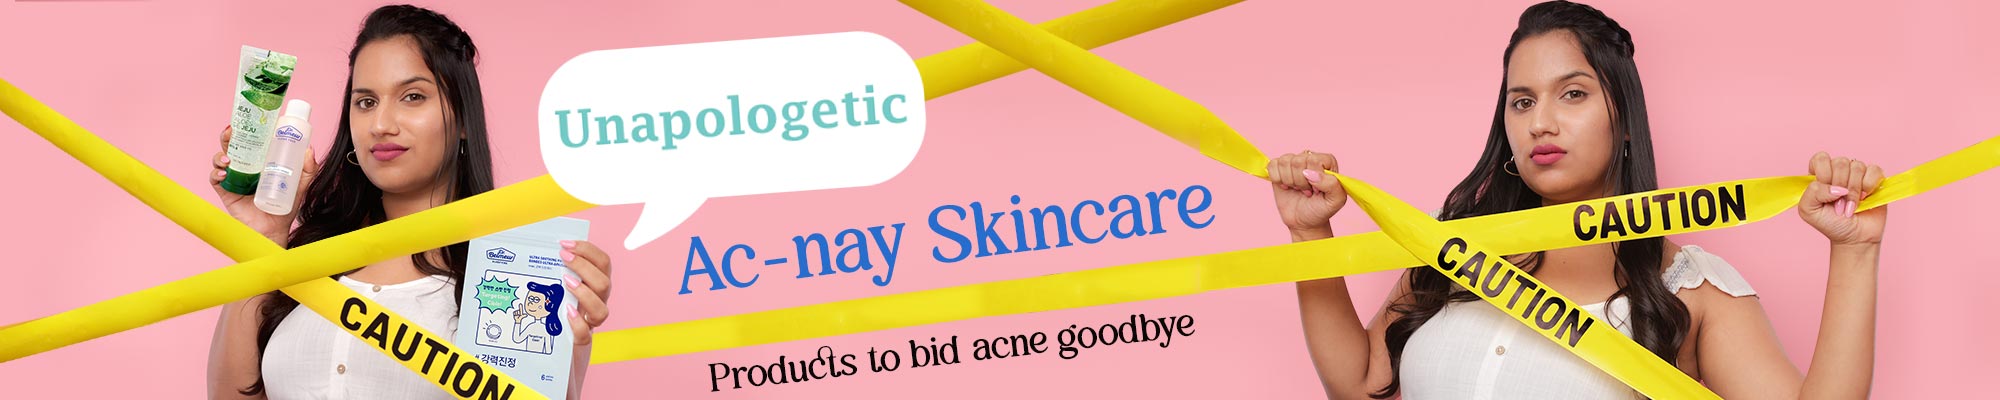 Unapologetic skincare (Skincare that won't leave you feeling sorry) - For acne